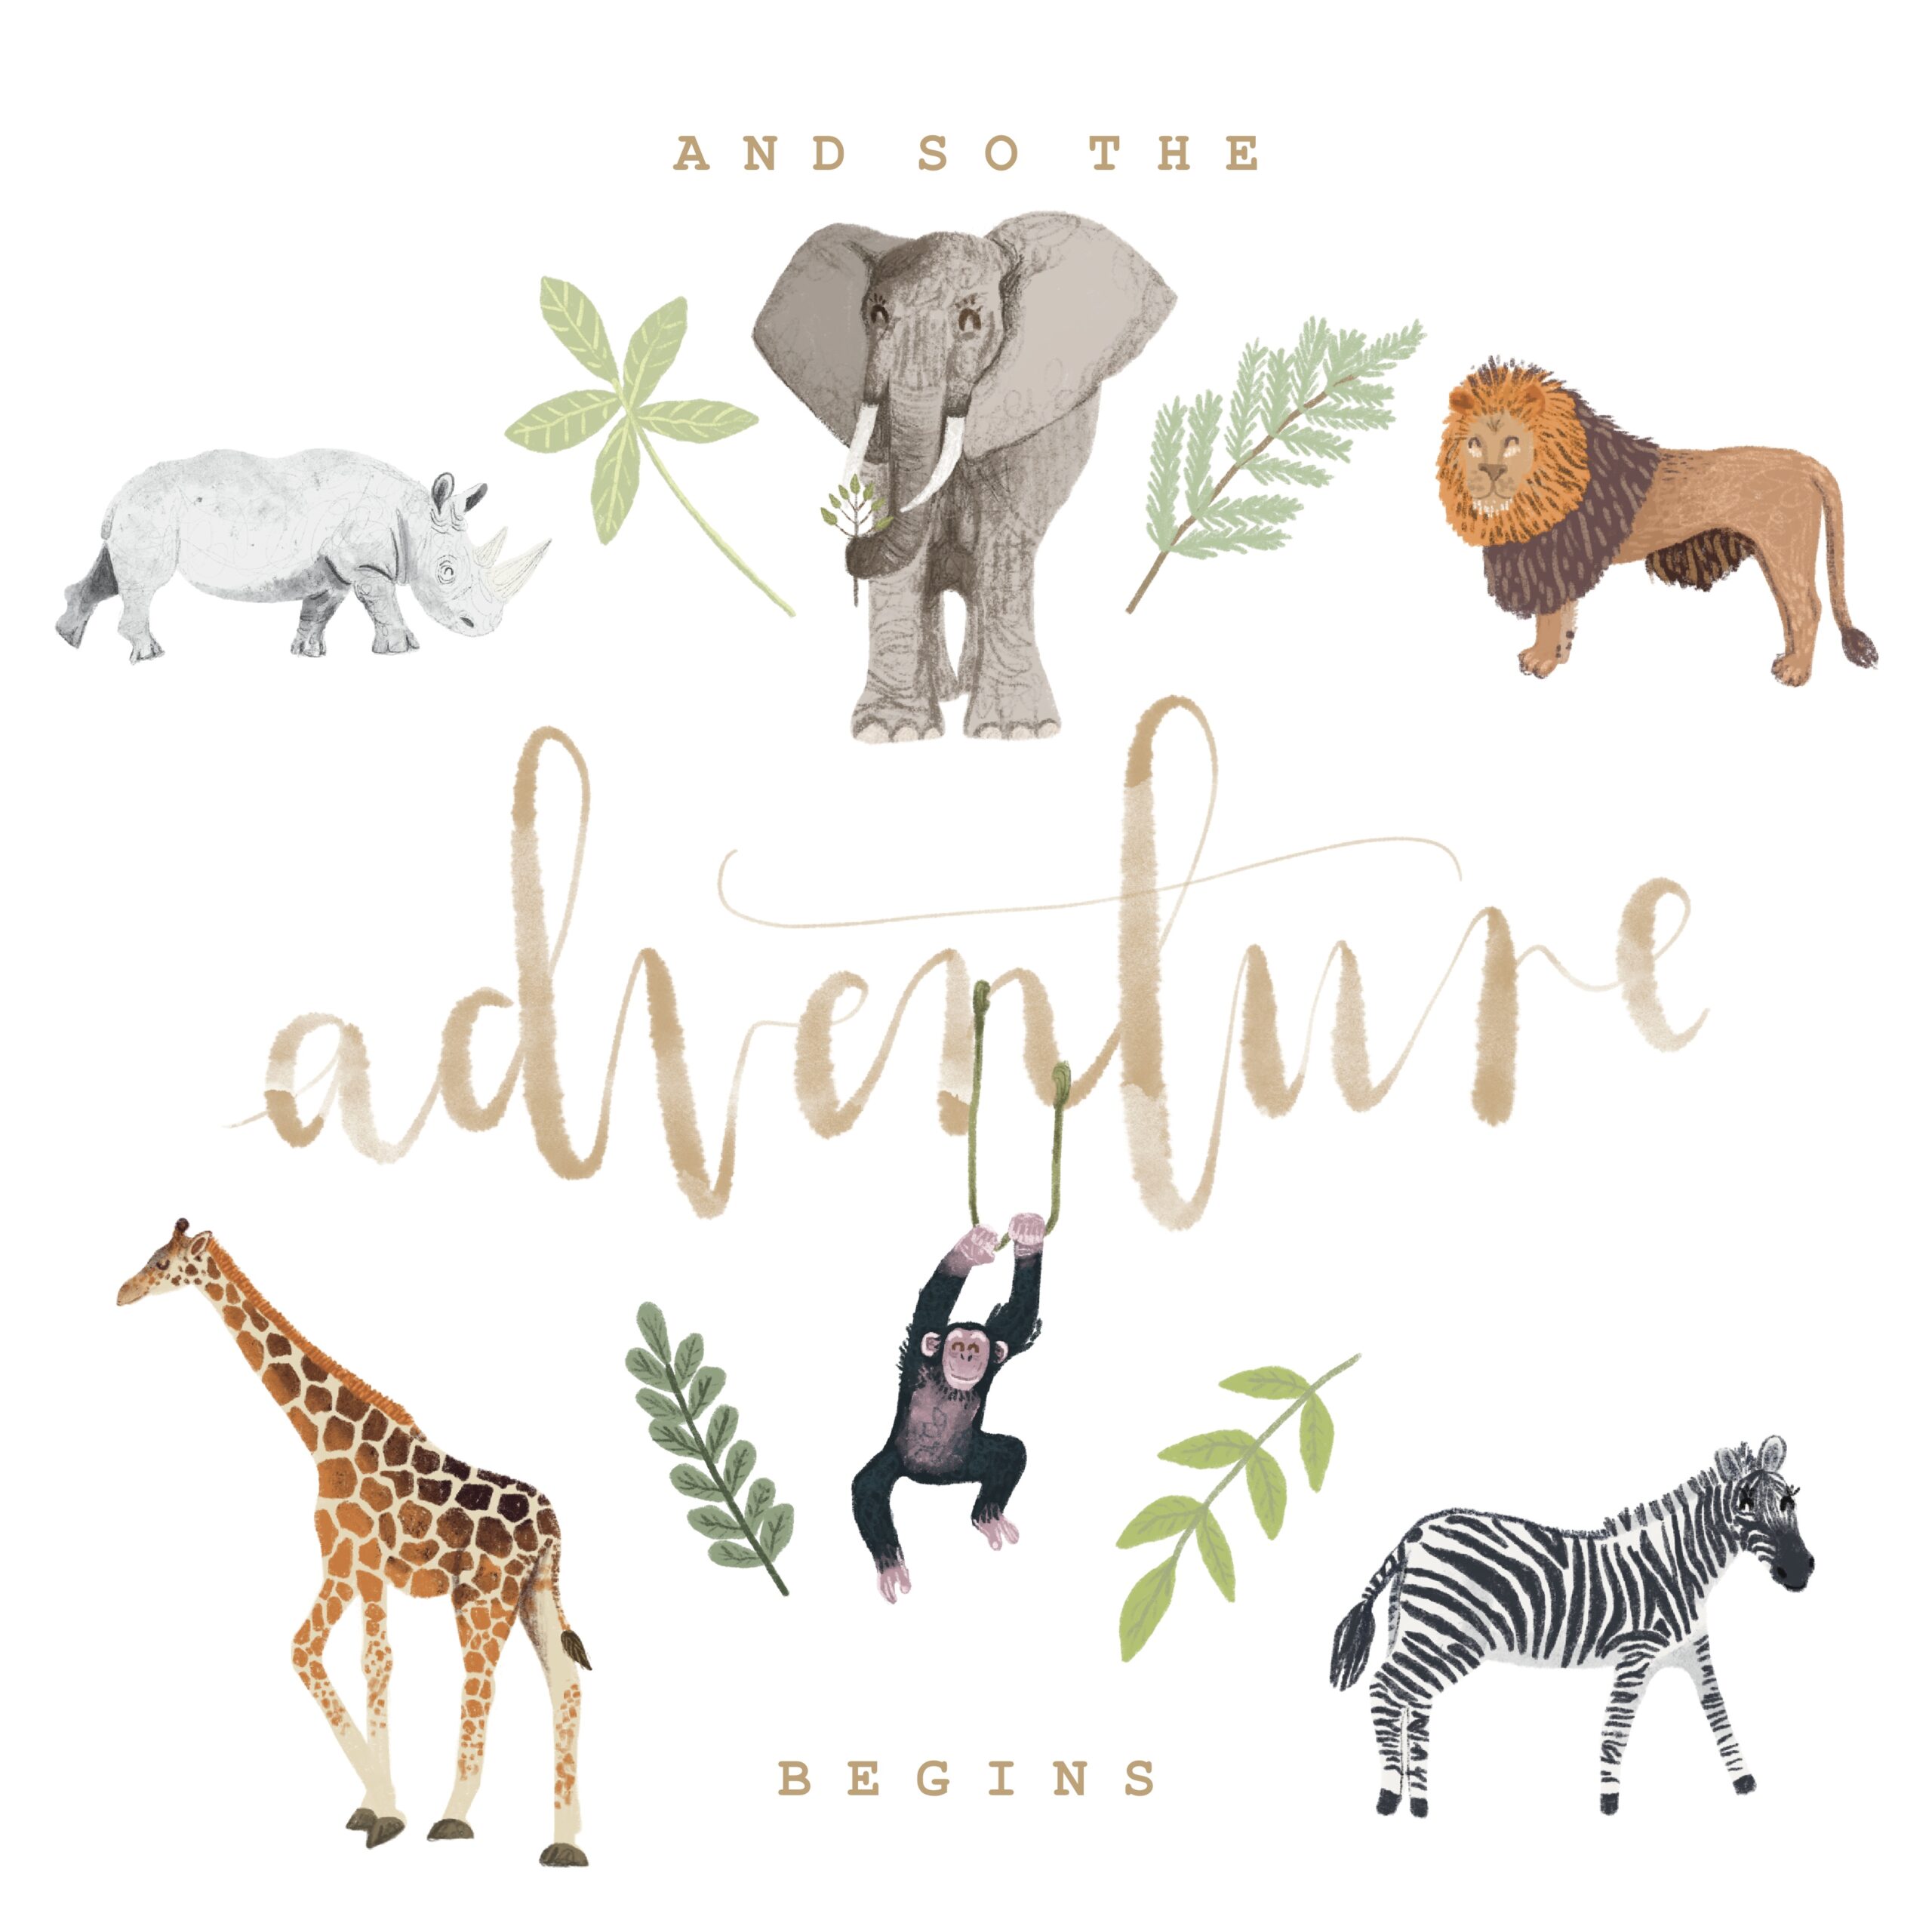 Illustration of different safari animals with foliage and greenery with the words And so the advernture begins